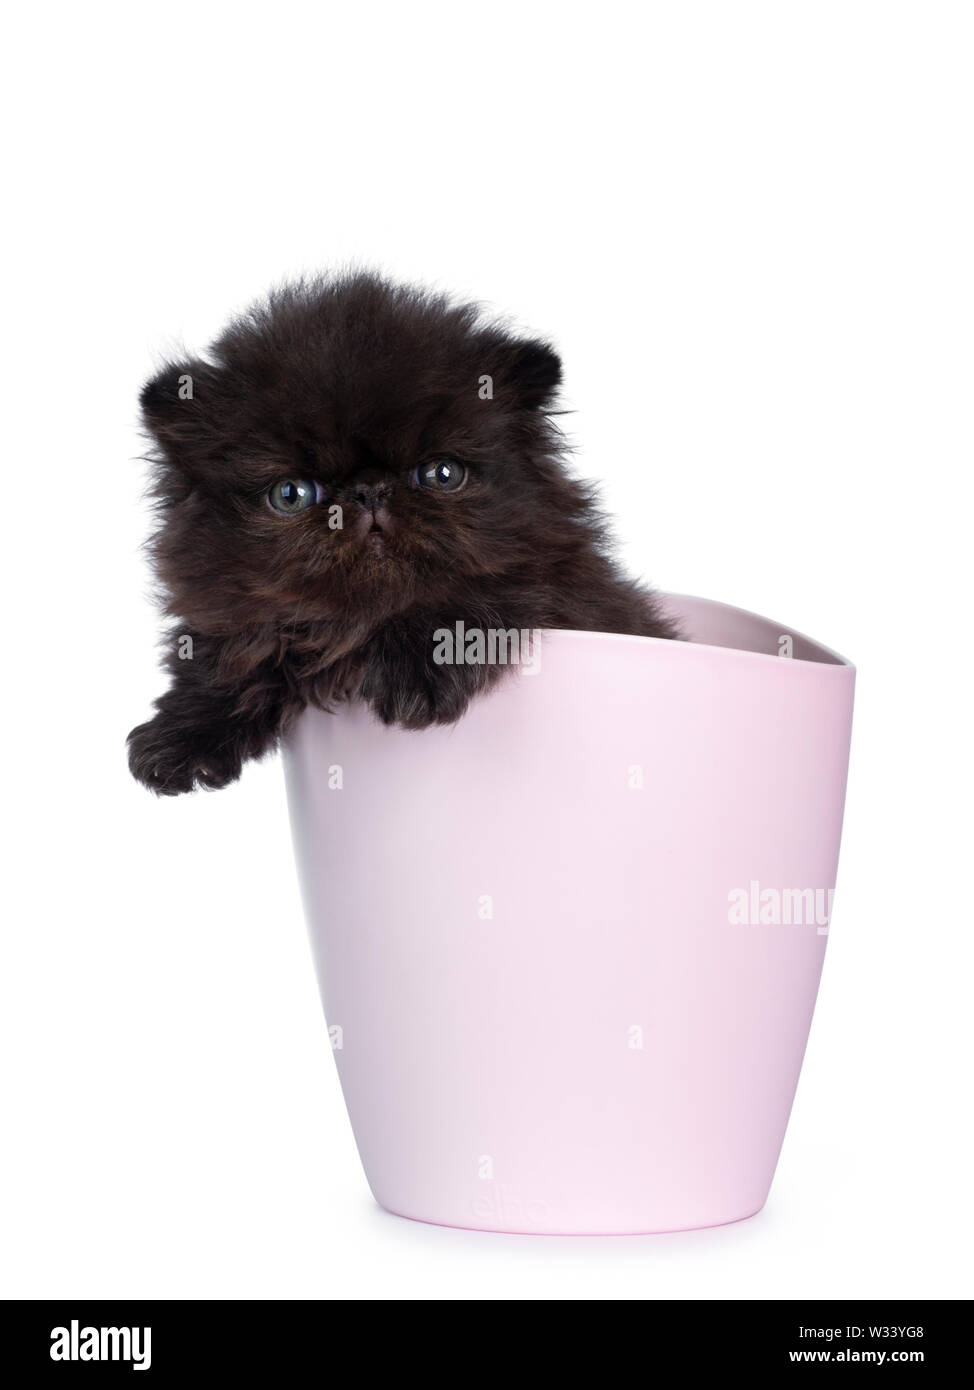 Cute 4 weeks old black Persian kitten, hanging over edge of pink flower pot. Looking at camera with greenish blue eyes. Isolated on white background. Stock Photo